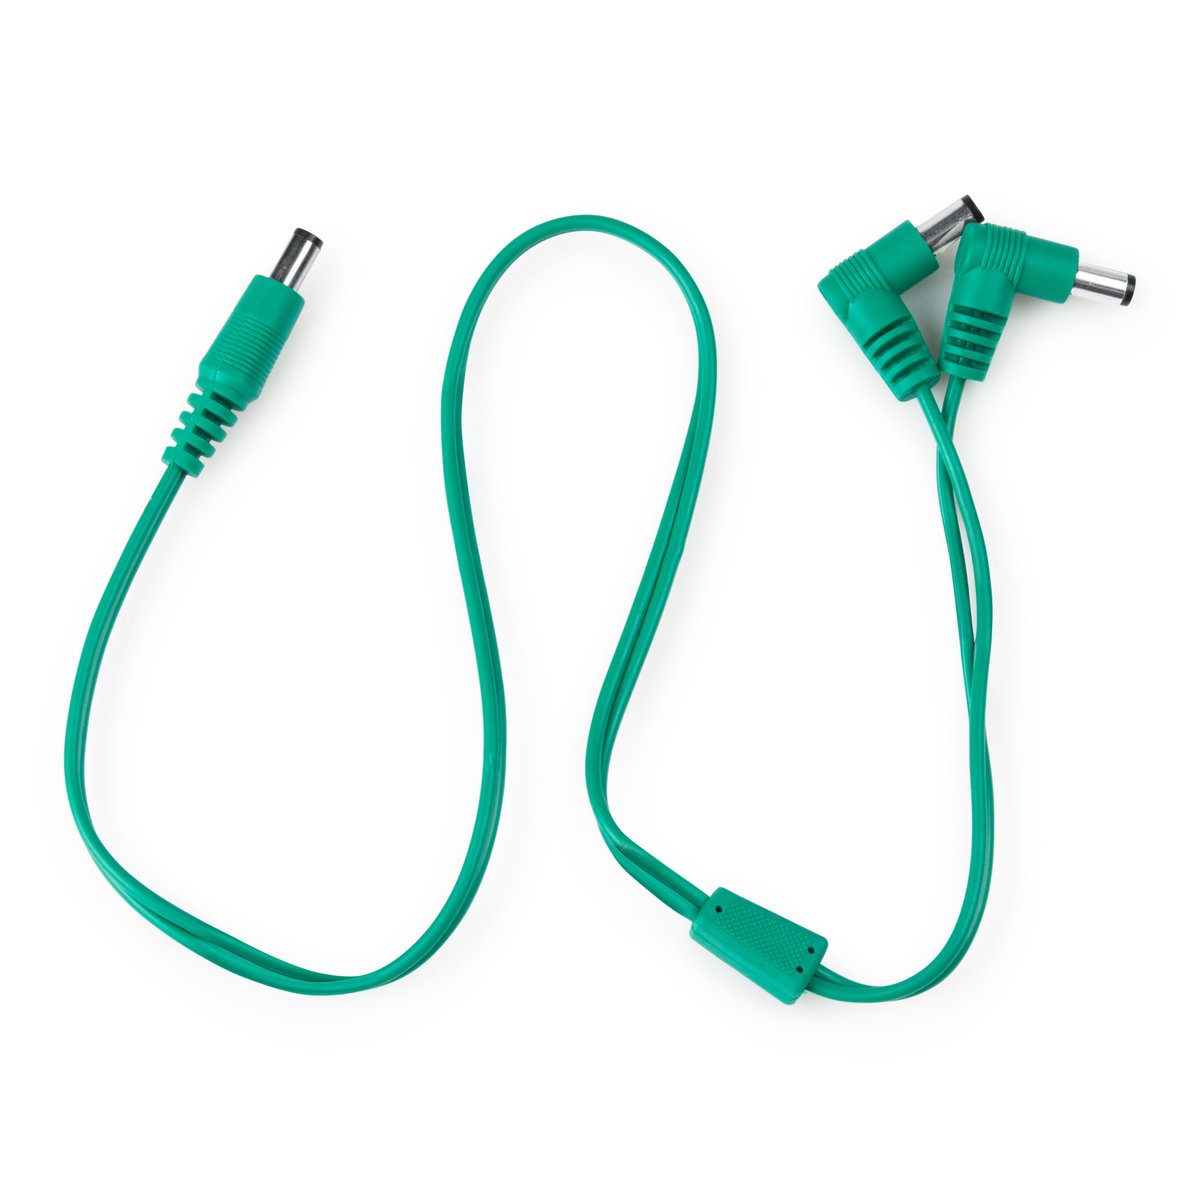 Current Doubler Adapter Cable for Effects Pedal Power Supplies